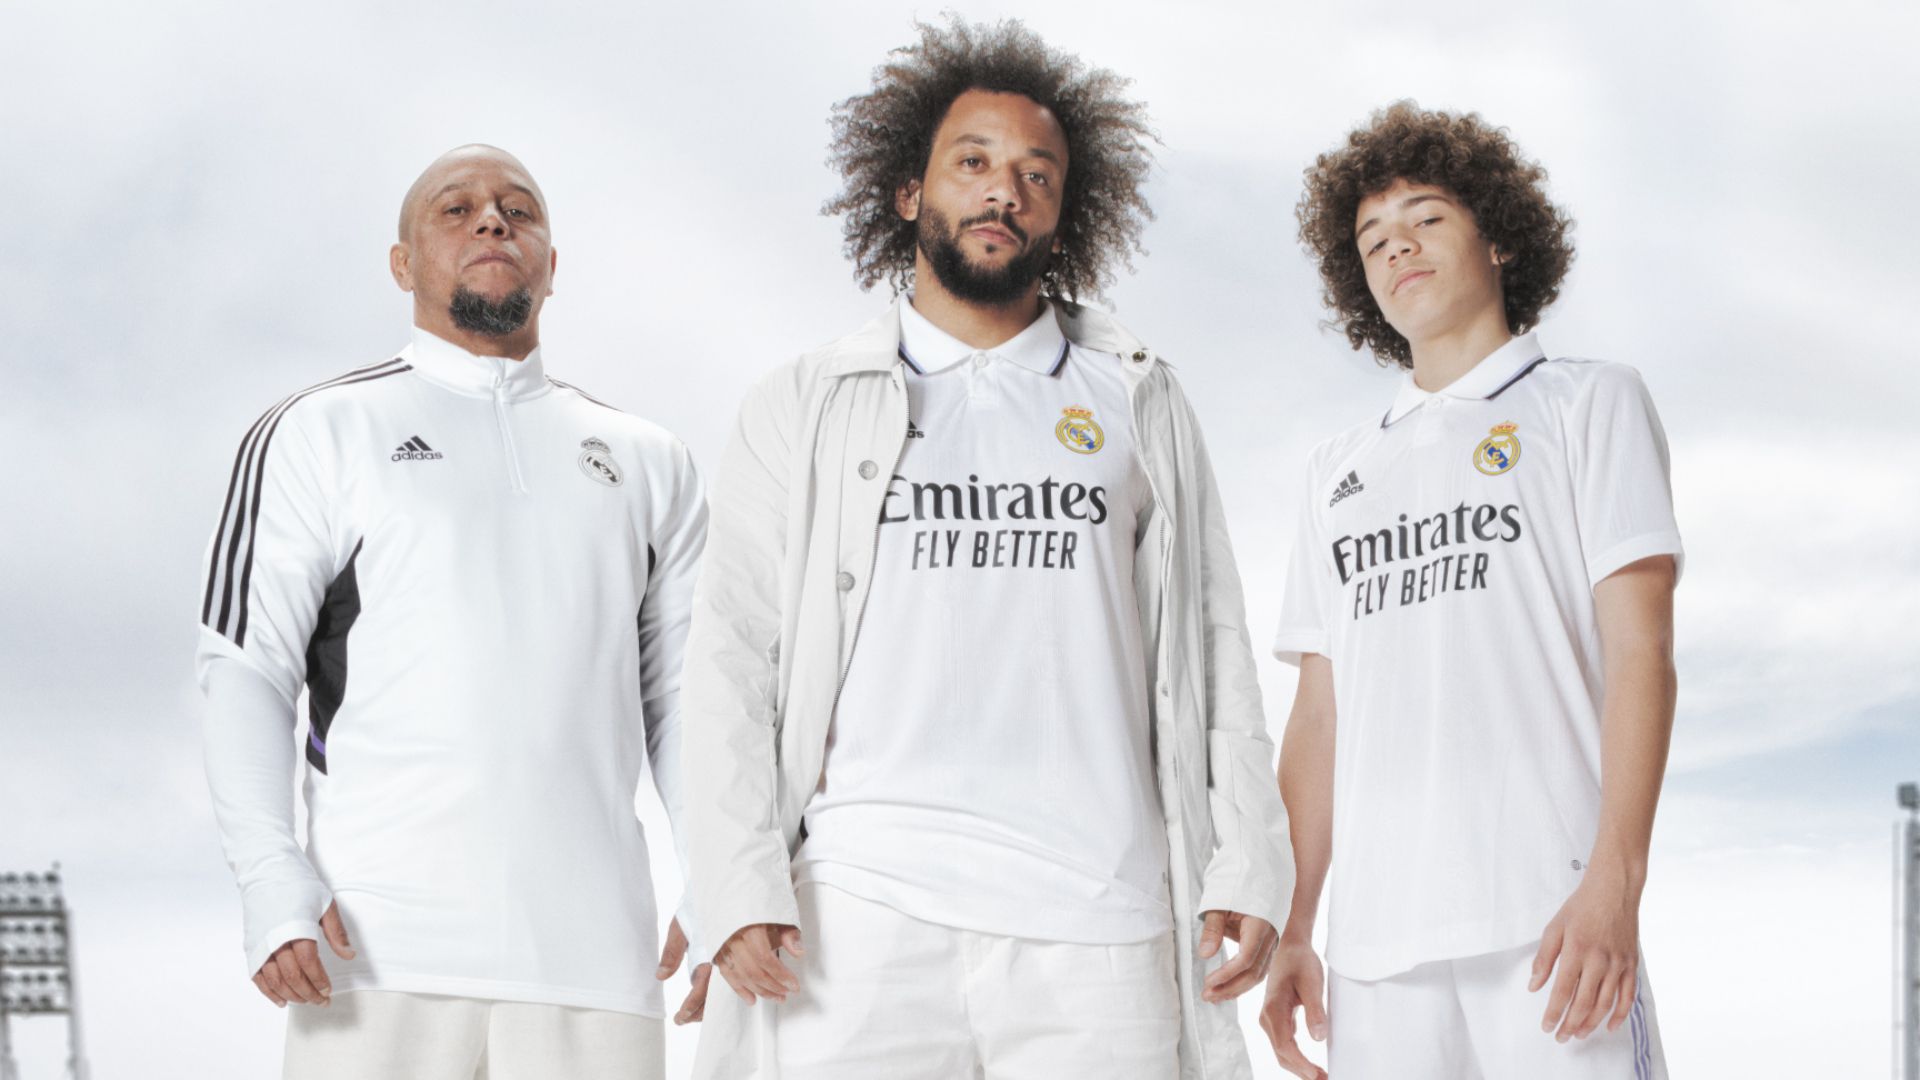 Mejorar Contar Promover Real Madrid unveil new home kit celebrating 120th anniversary | LiveScore